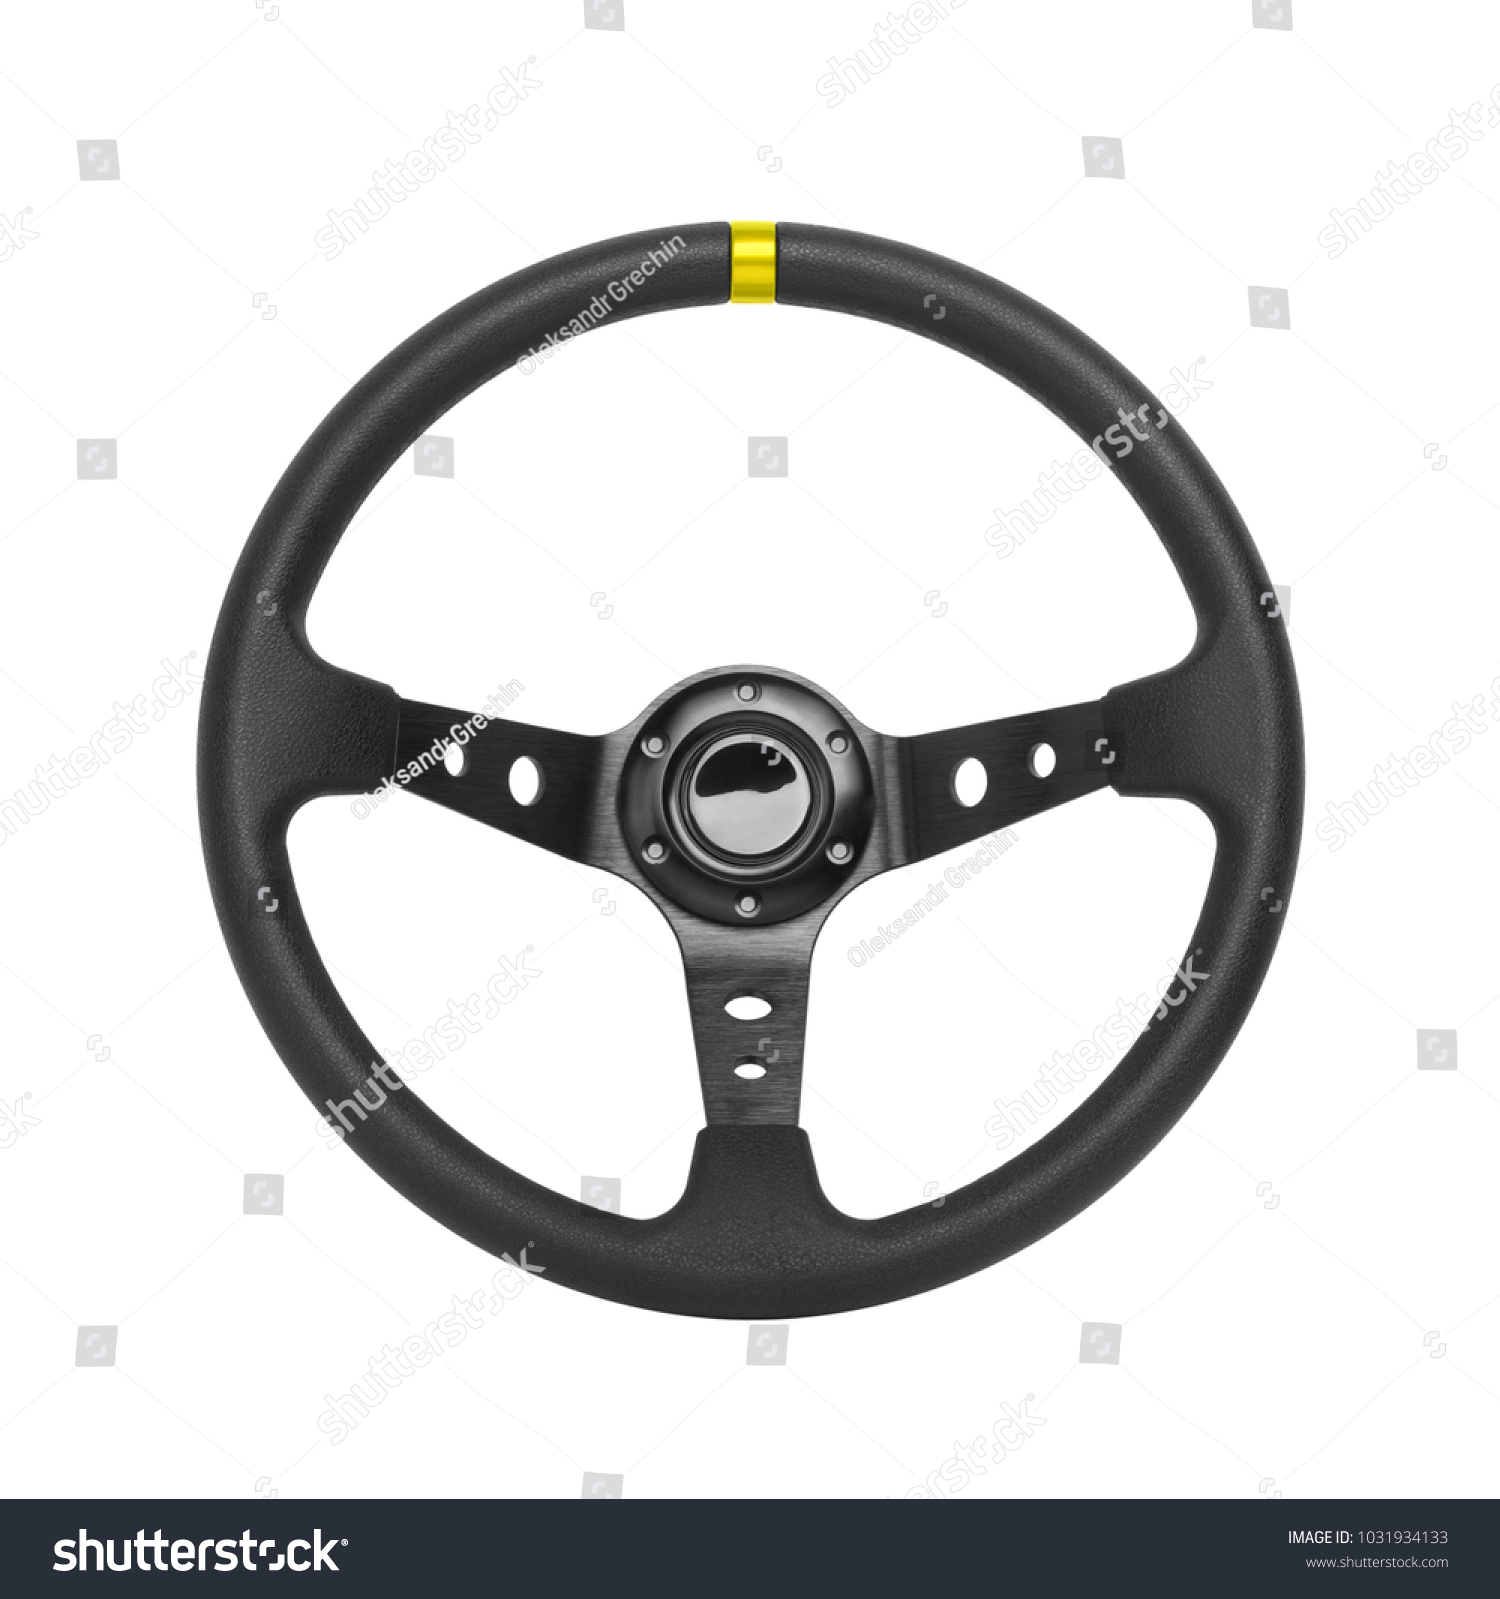 Steering wheel, isolated on the white background #1031934133